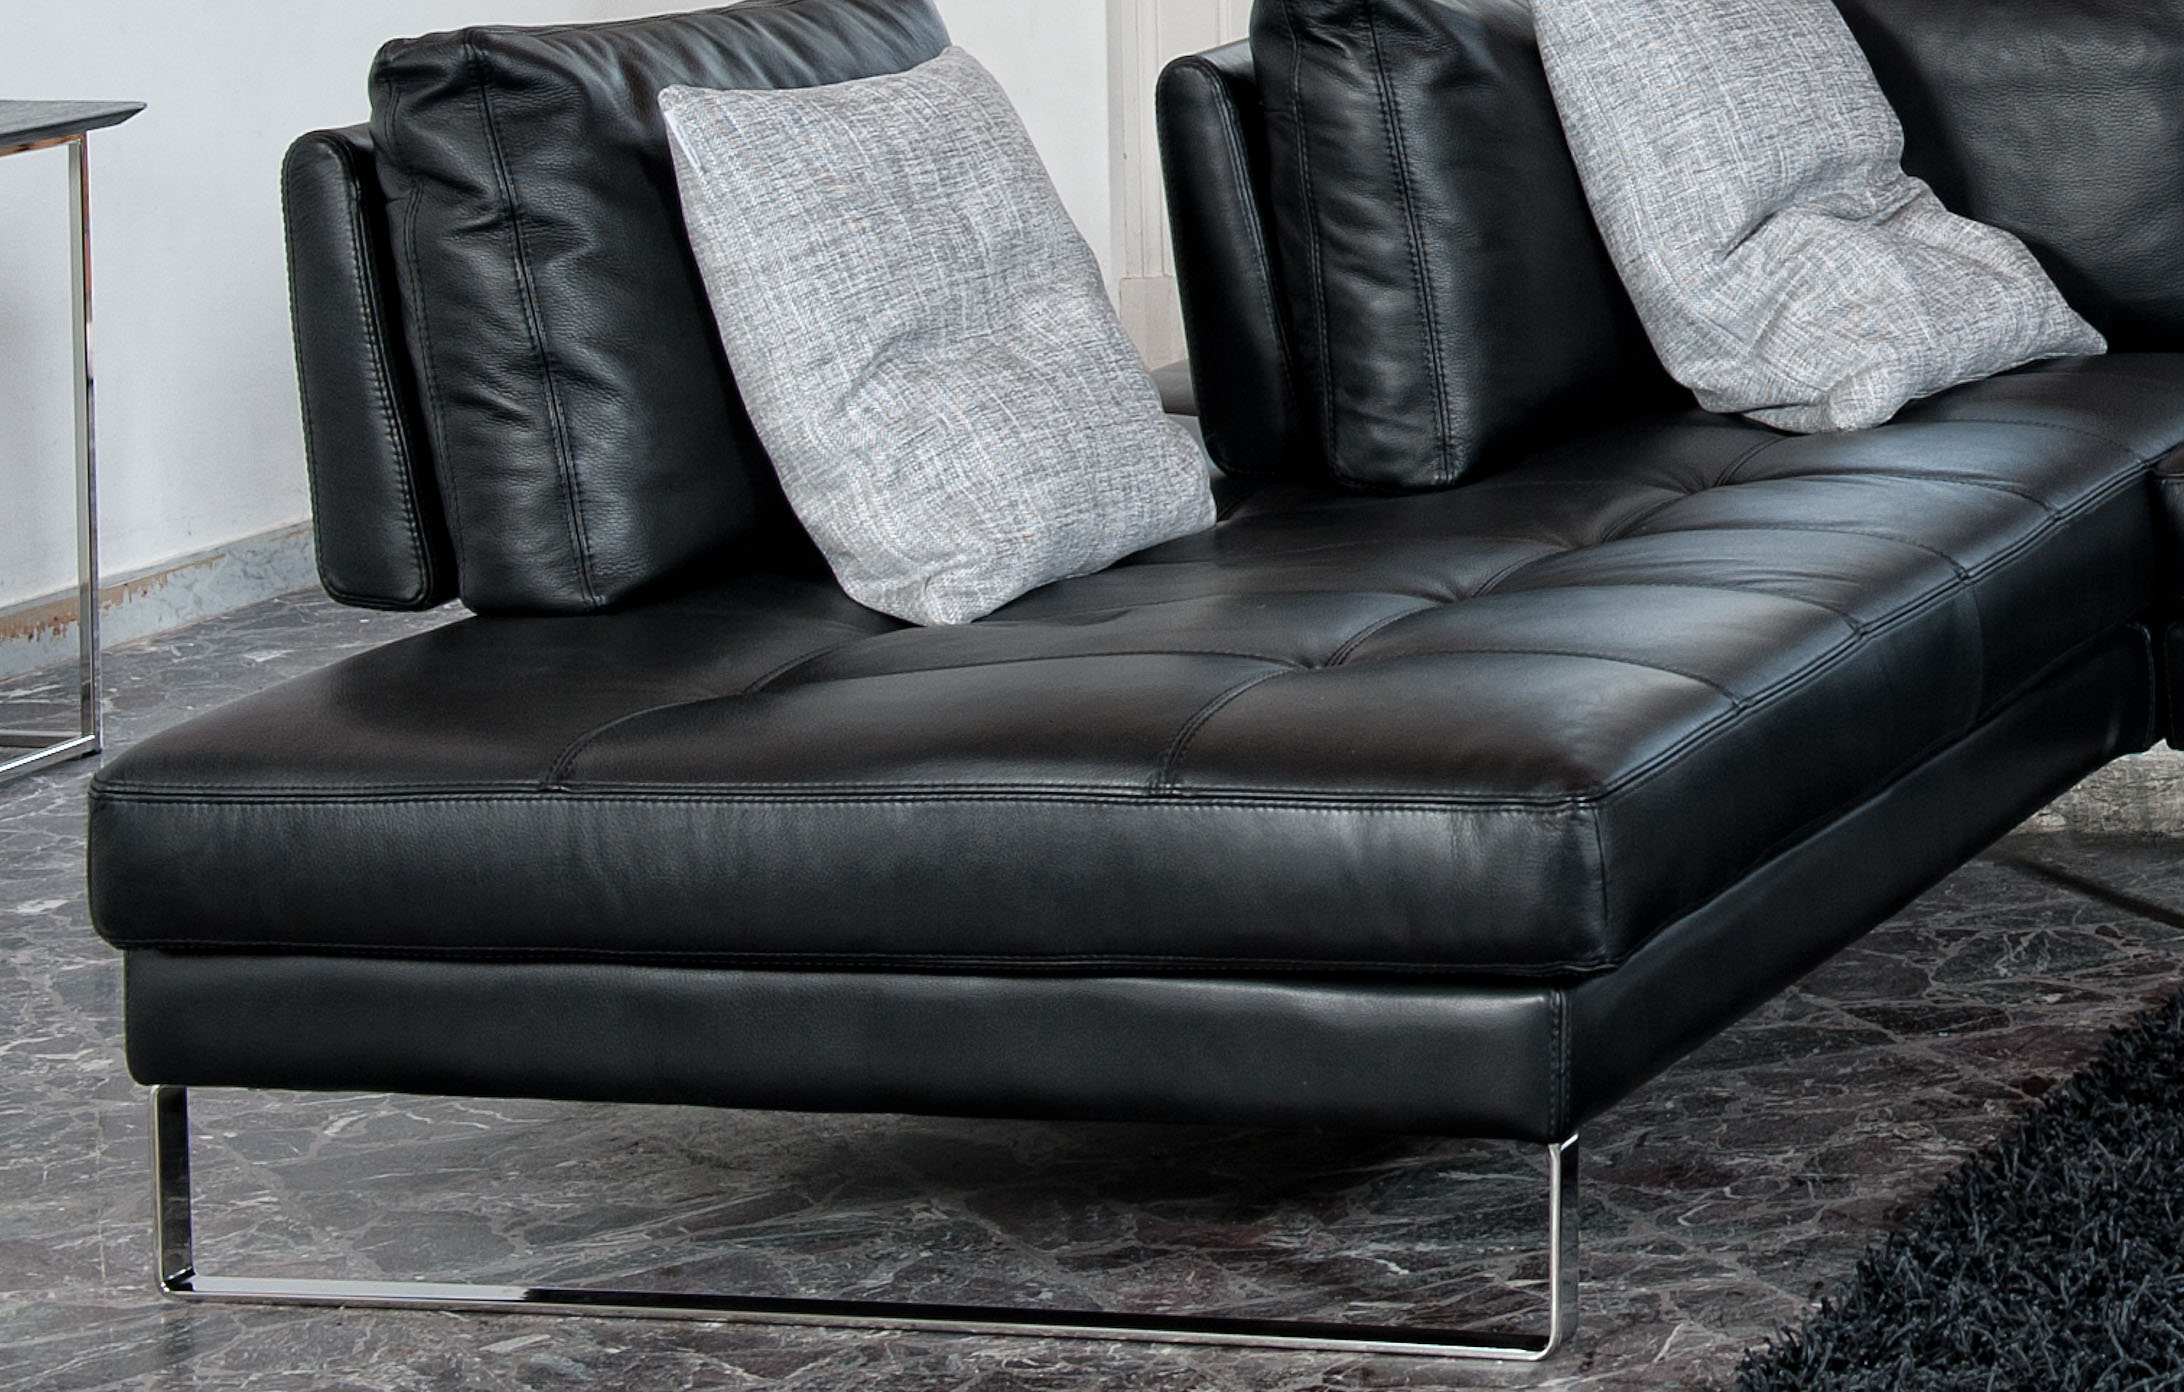 Overnice Full Italian Leather Sectionals with Pillows